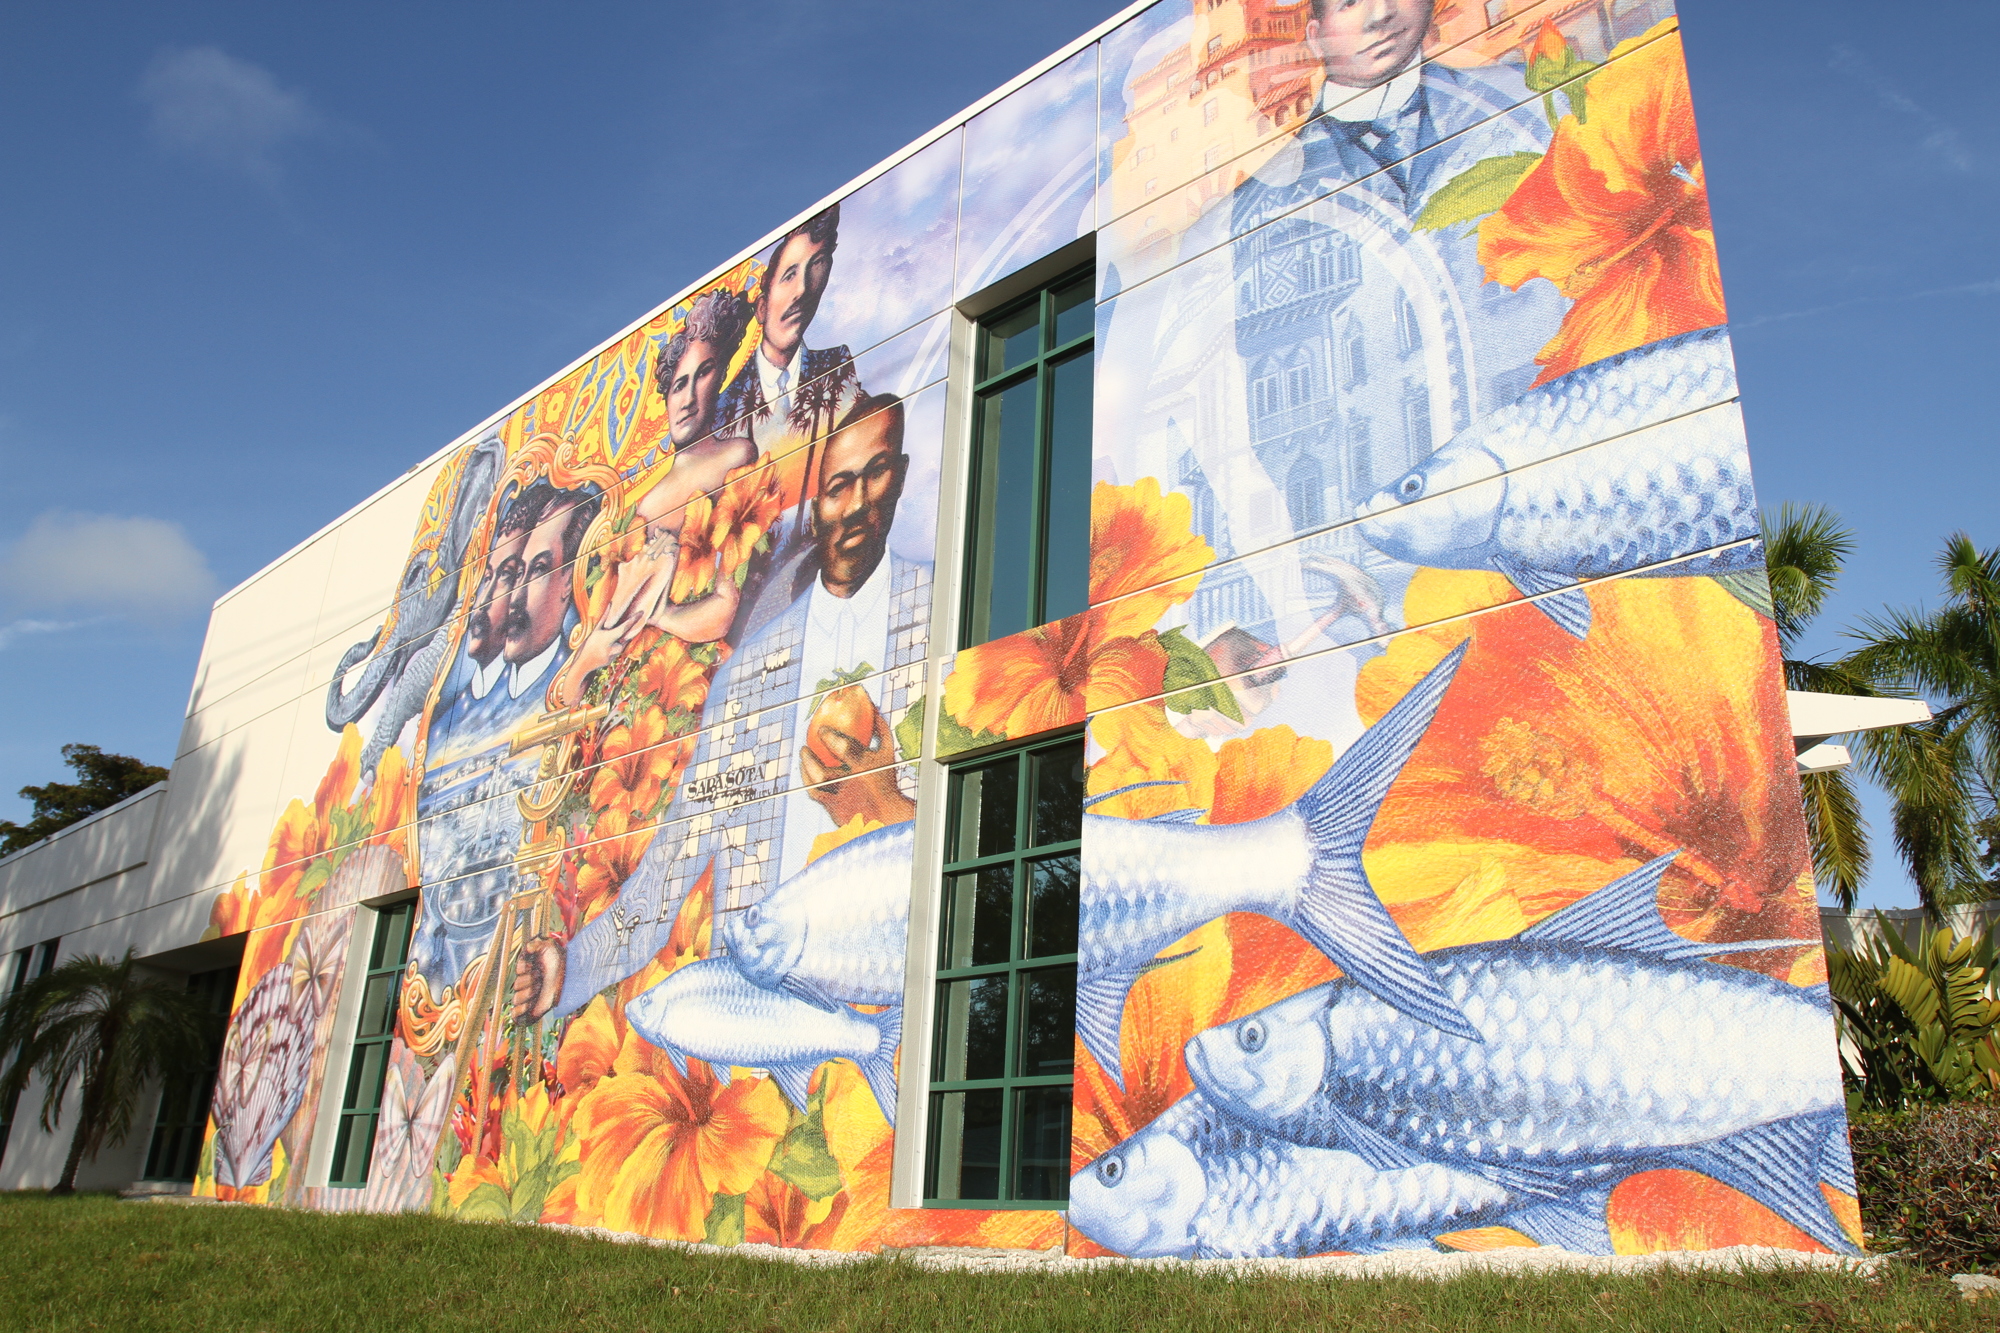 MARCH: The murals at the Greater Sarasota Chamber of Commerce tell a story of the area's history.